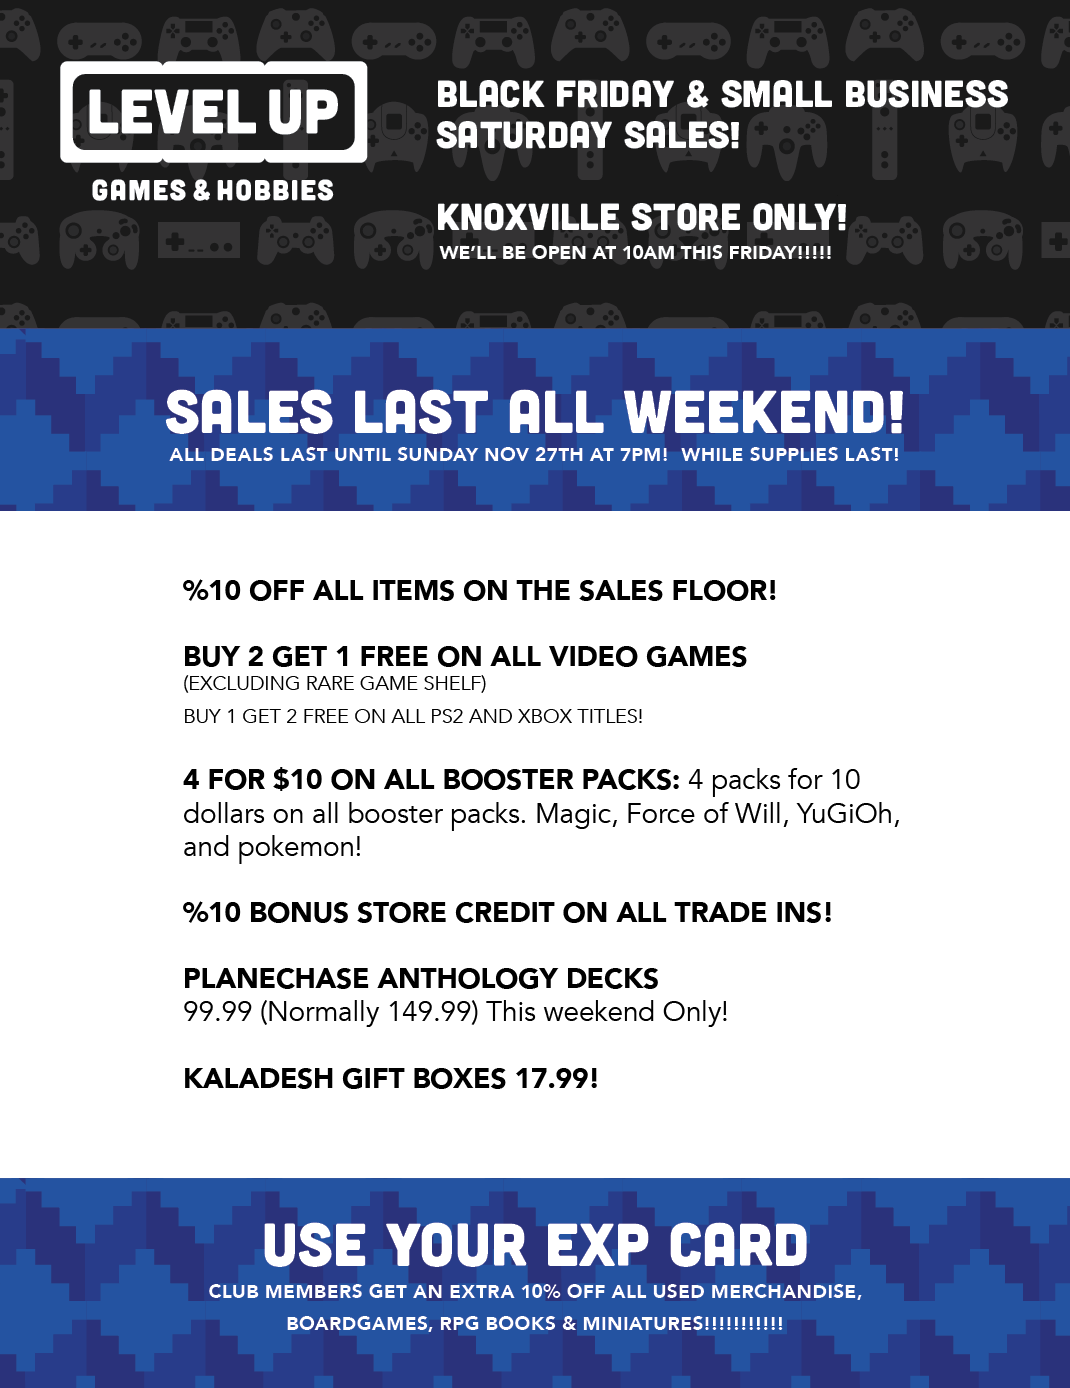 Black Friday Sales Knoxville Level Up Games Hobbies